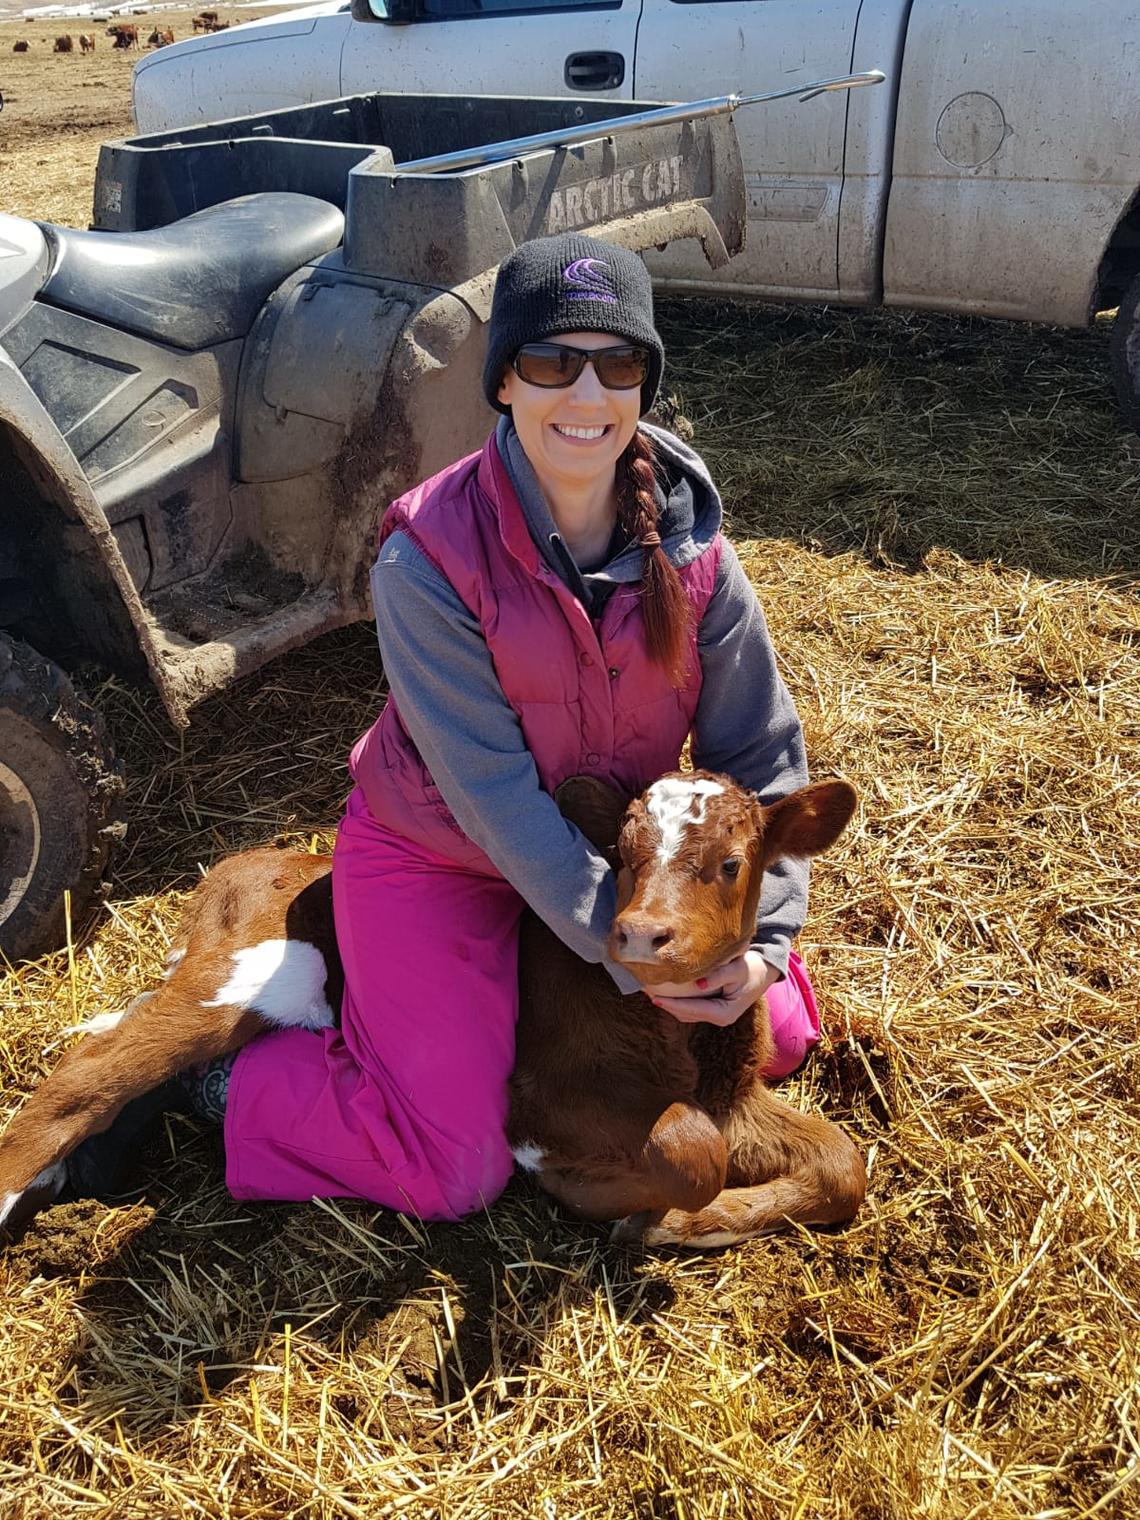 Jennifer Pearson became interested in newborn calf research from her experiences seeing calves suffer severe muscle trauma or oxygen deprivation following a difficult birth.